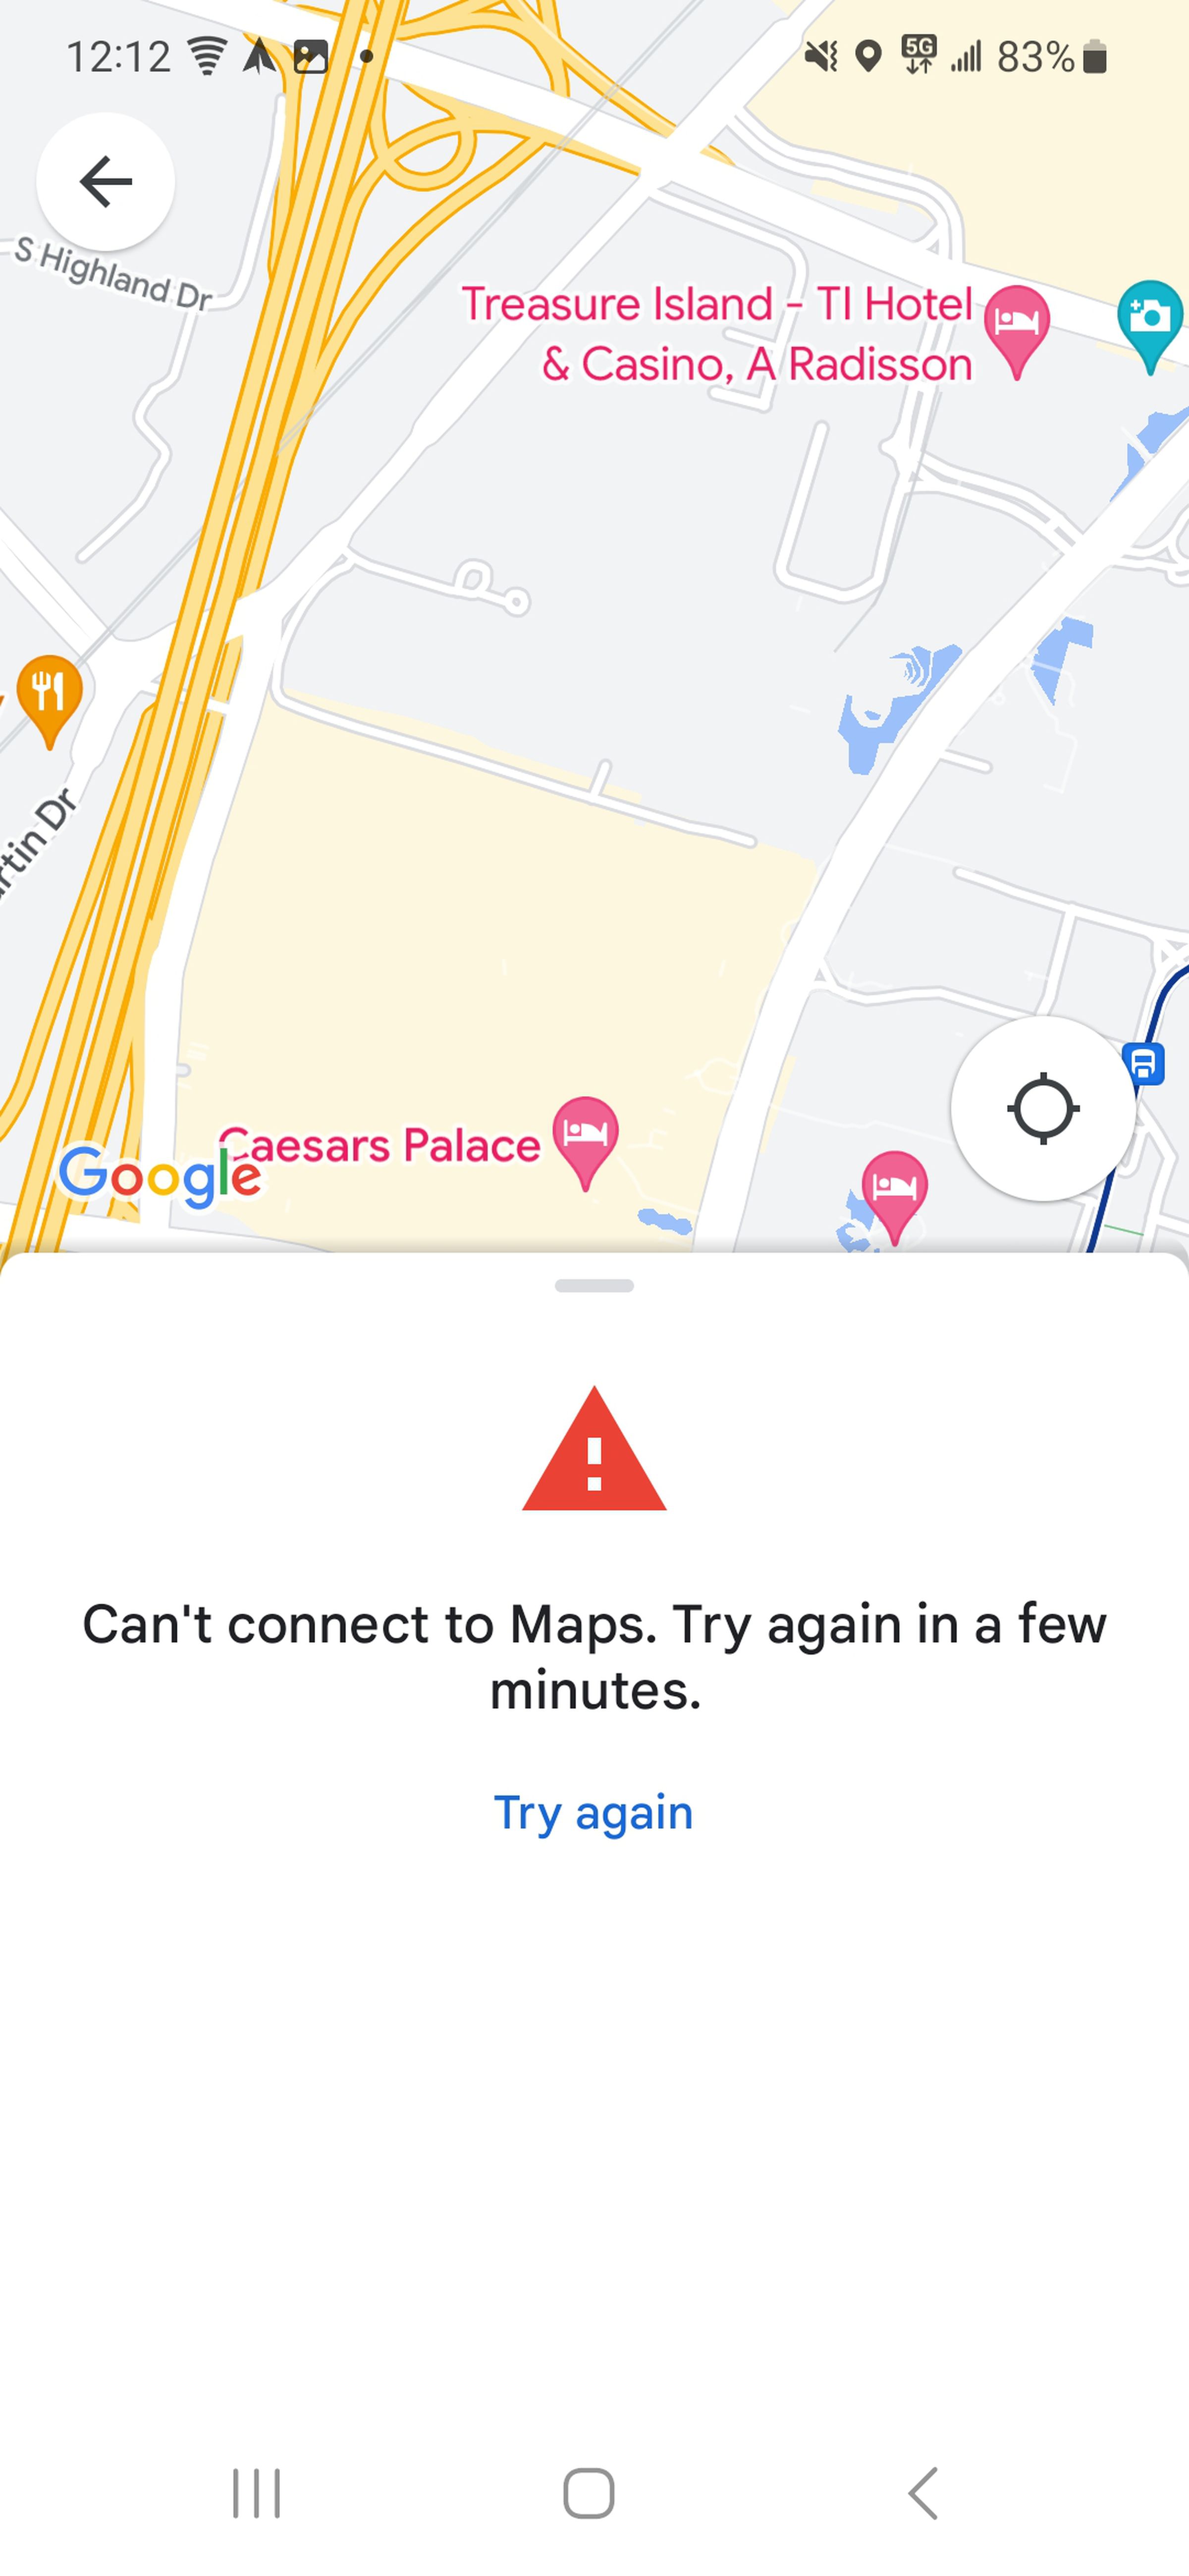 A screenshot of Google Maps with the error message “Unable to connect to Maps.  Please try again in a few minutes.